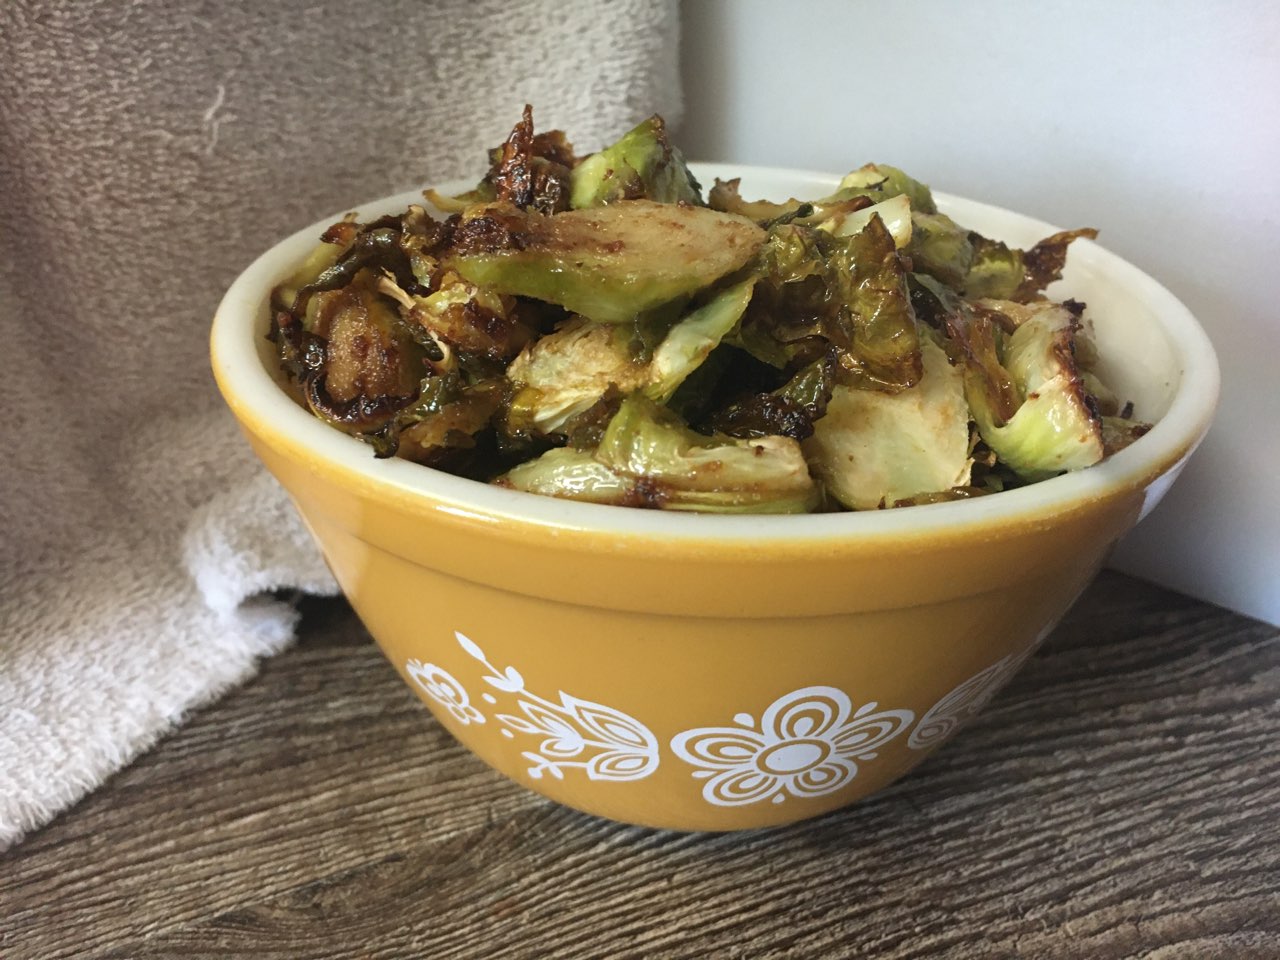 5 Ingredient Asian Inspired Brussels Sprouts in an old fashioned yellow bowl